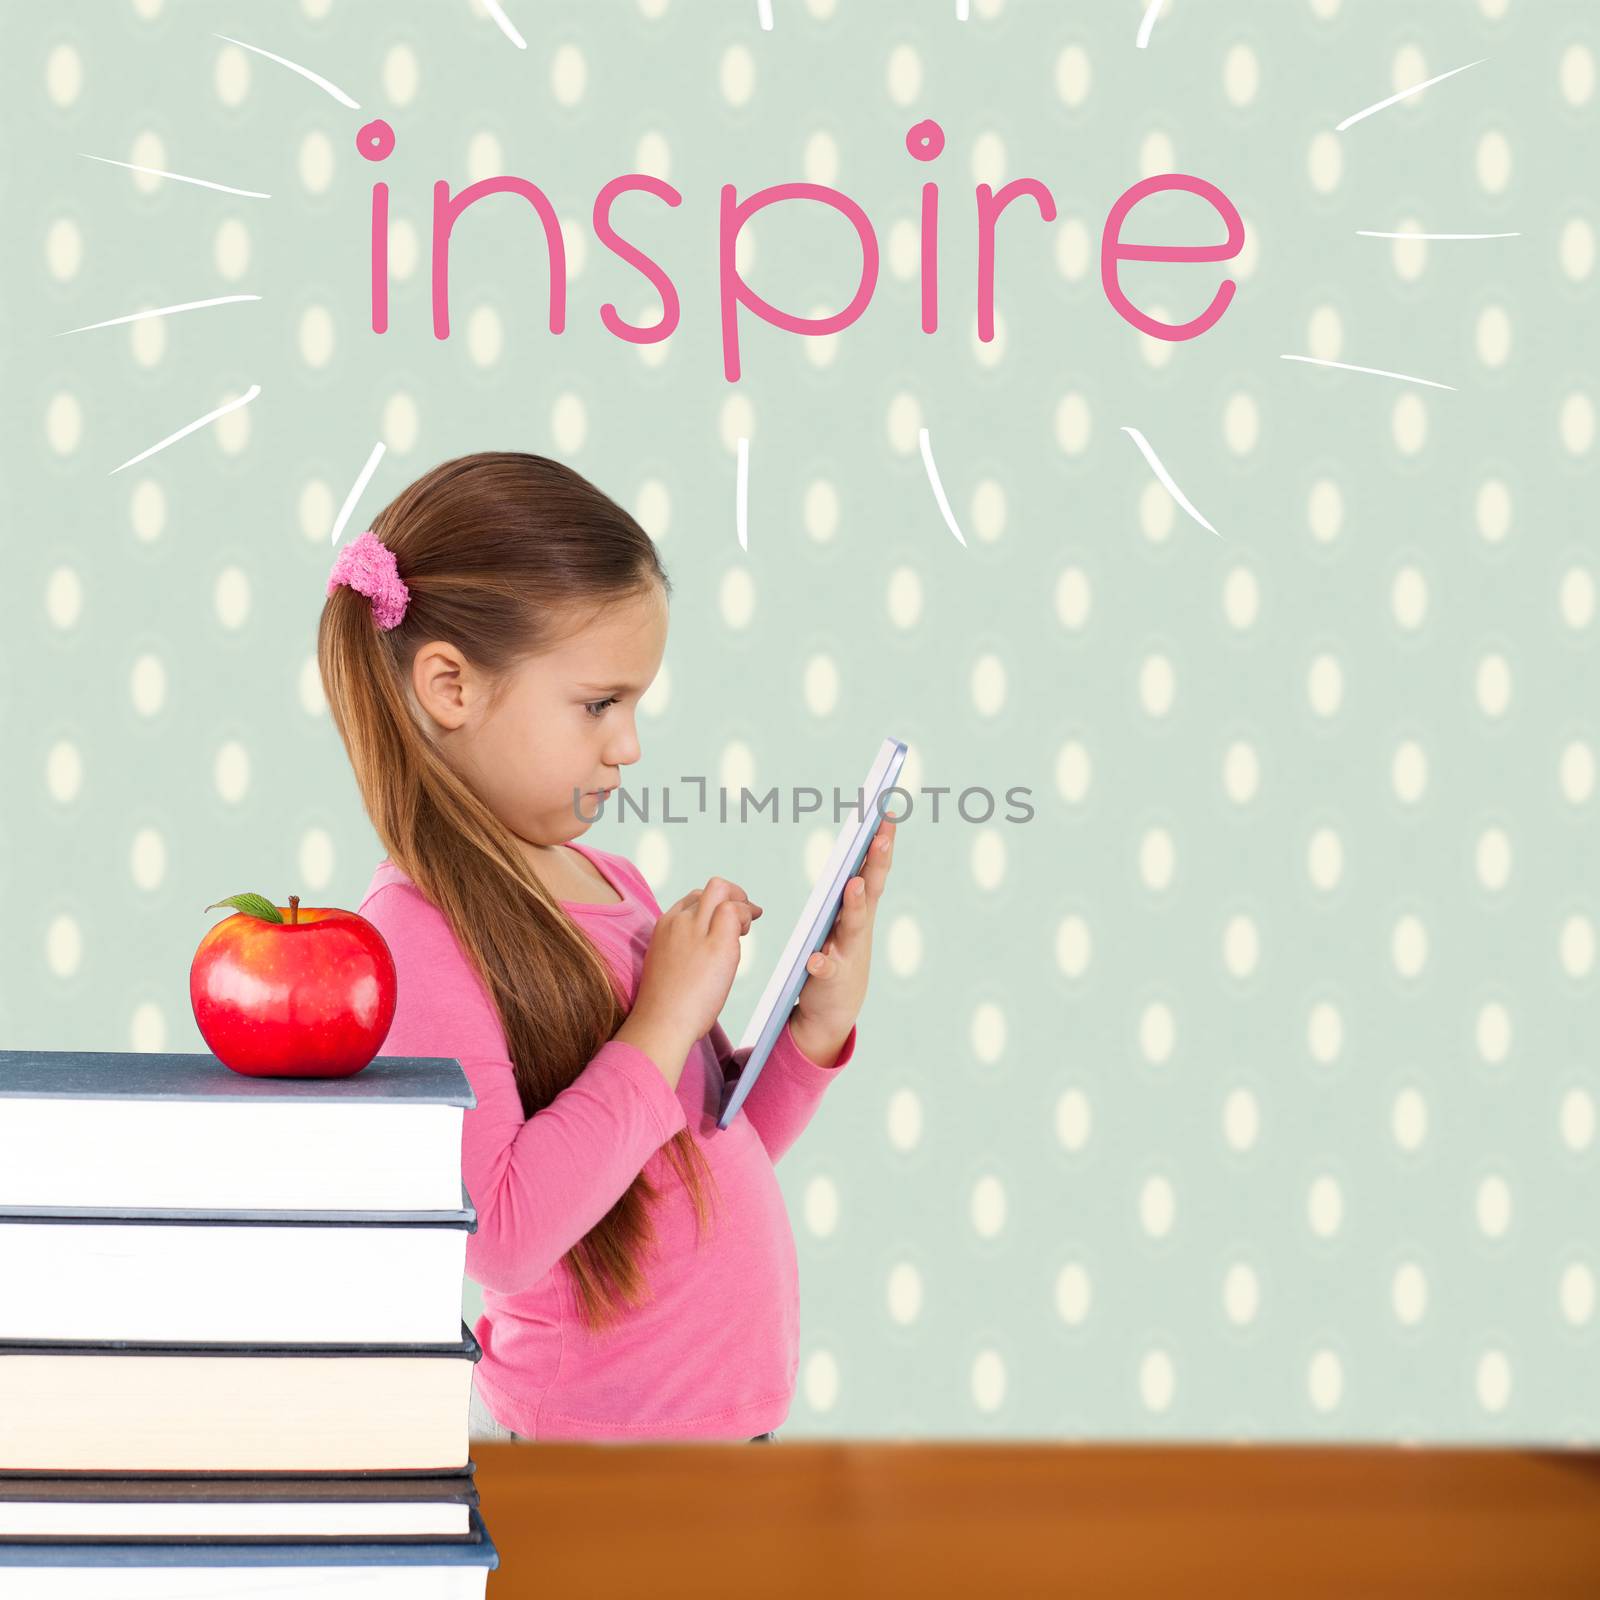 The word inspire and cute girl using tablet against red apple on pile of books